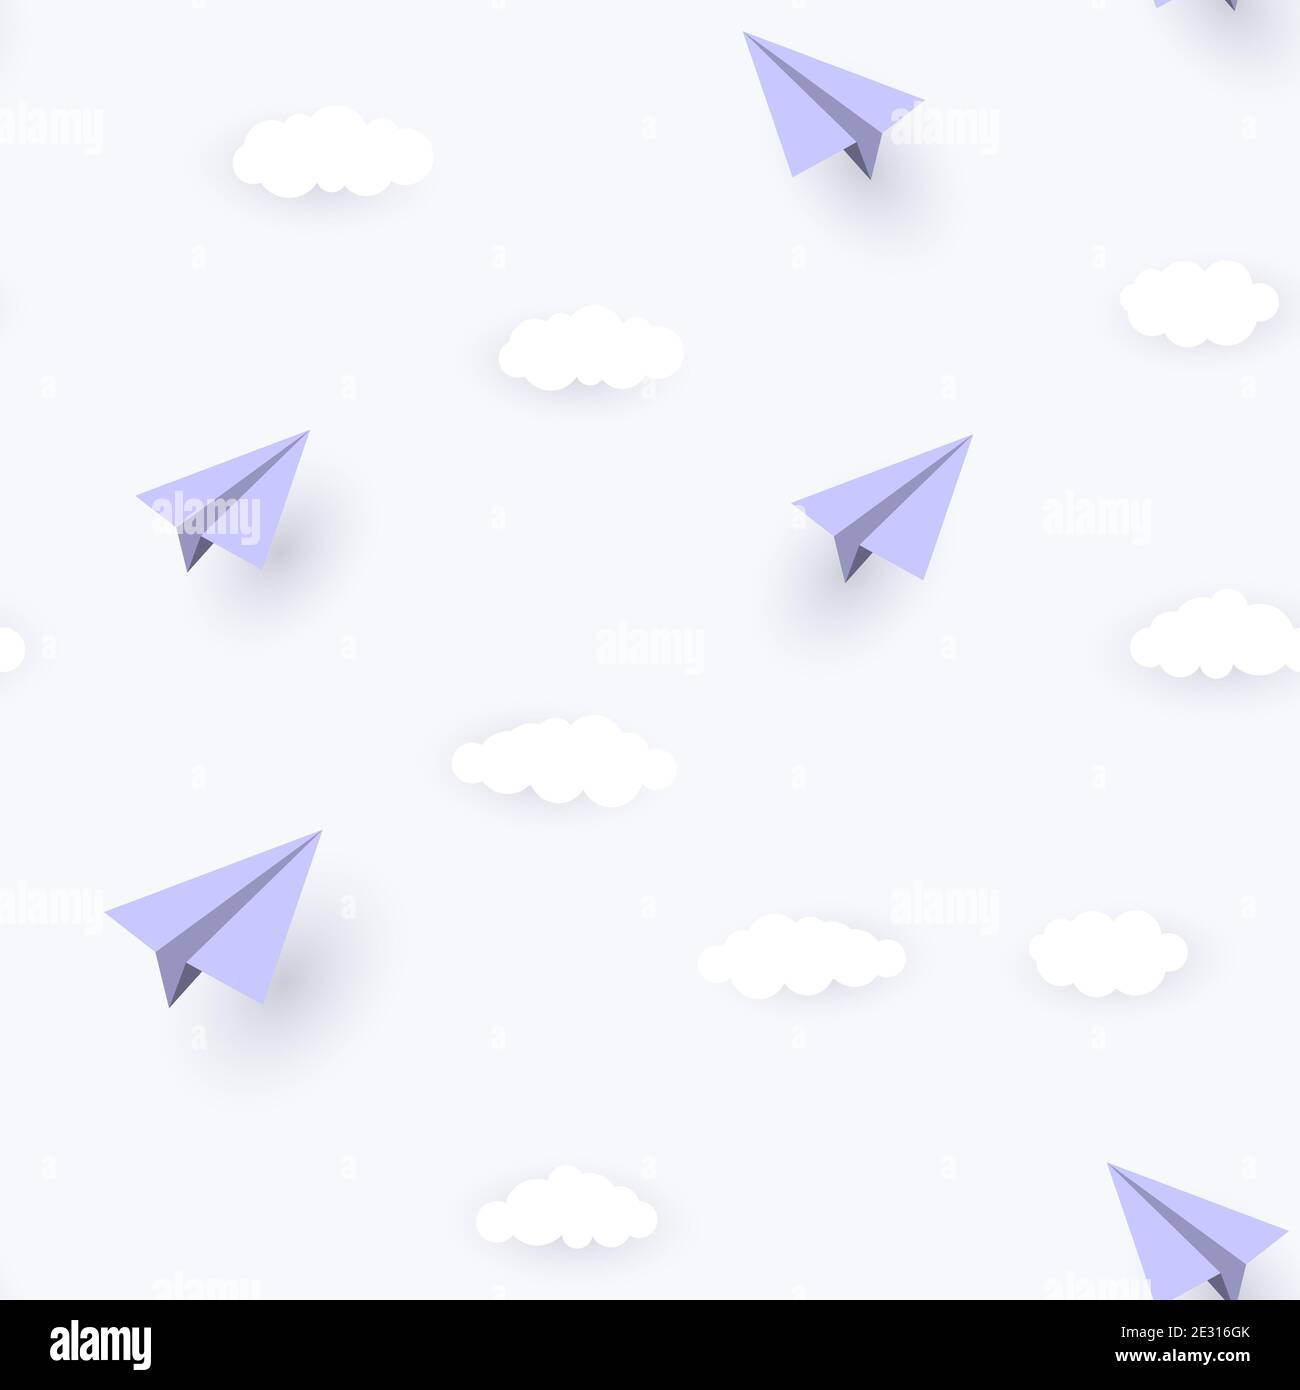 Paper Airplane and Clouds Seamless Pattern Background Illustration Stock Photo